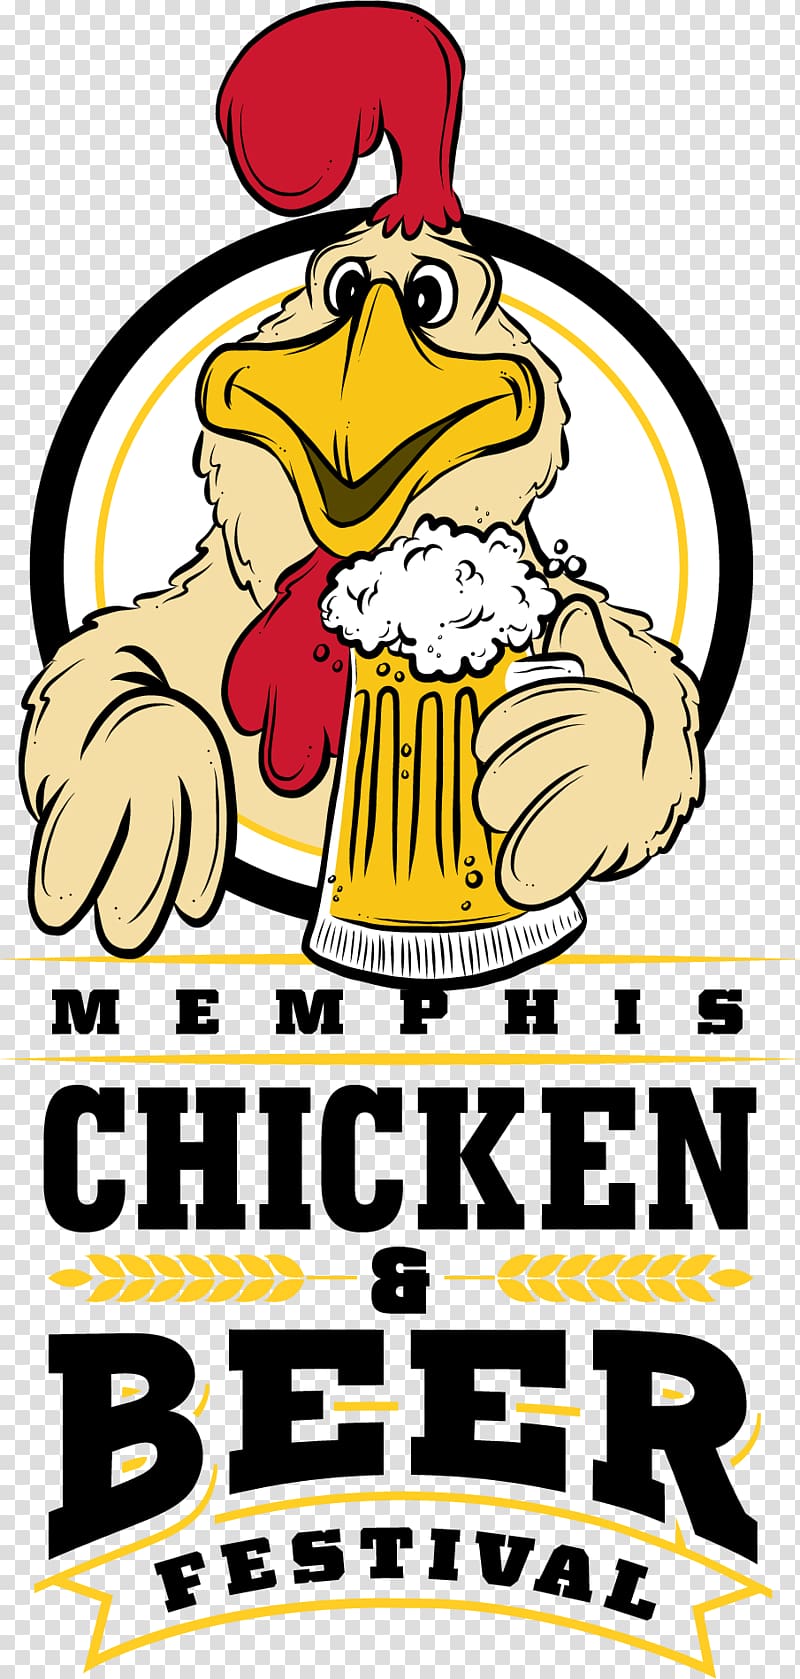 Beer festival Memphis Chicken, Bowling Flyer transparent background PNG clipart